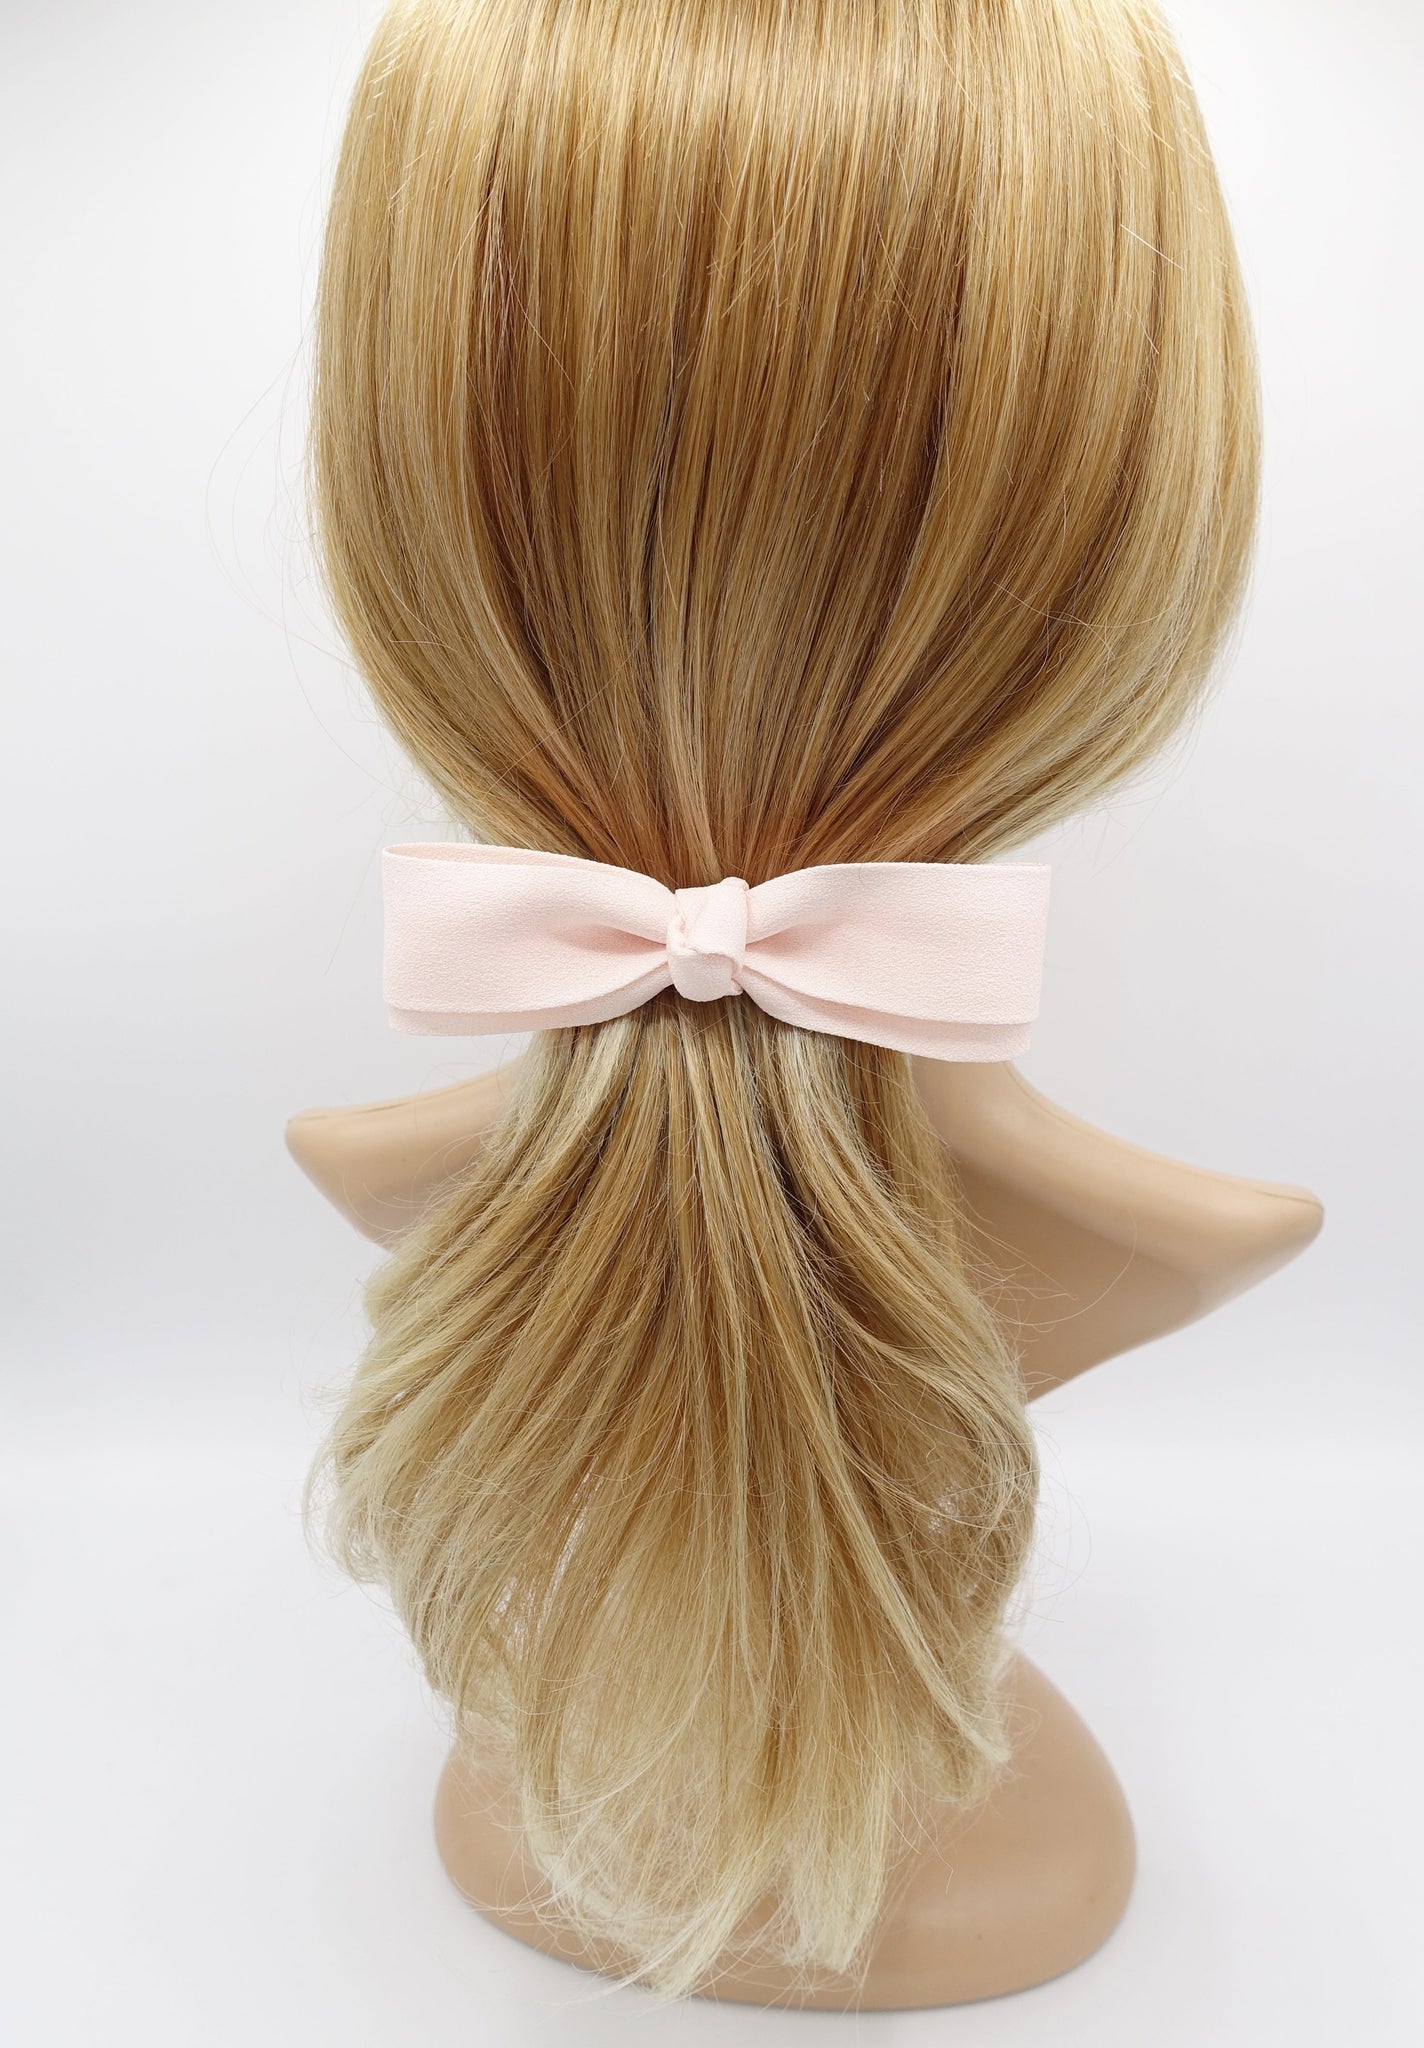 veryshine.com Barrette (Bow) Slim and straight Hair Bow French Barrettes Women Hair Accessories